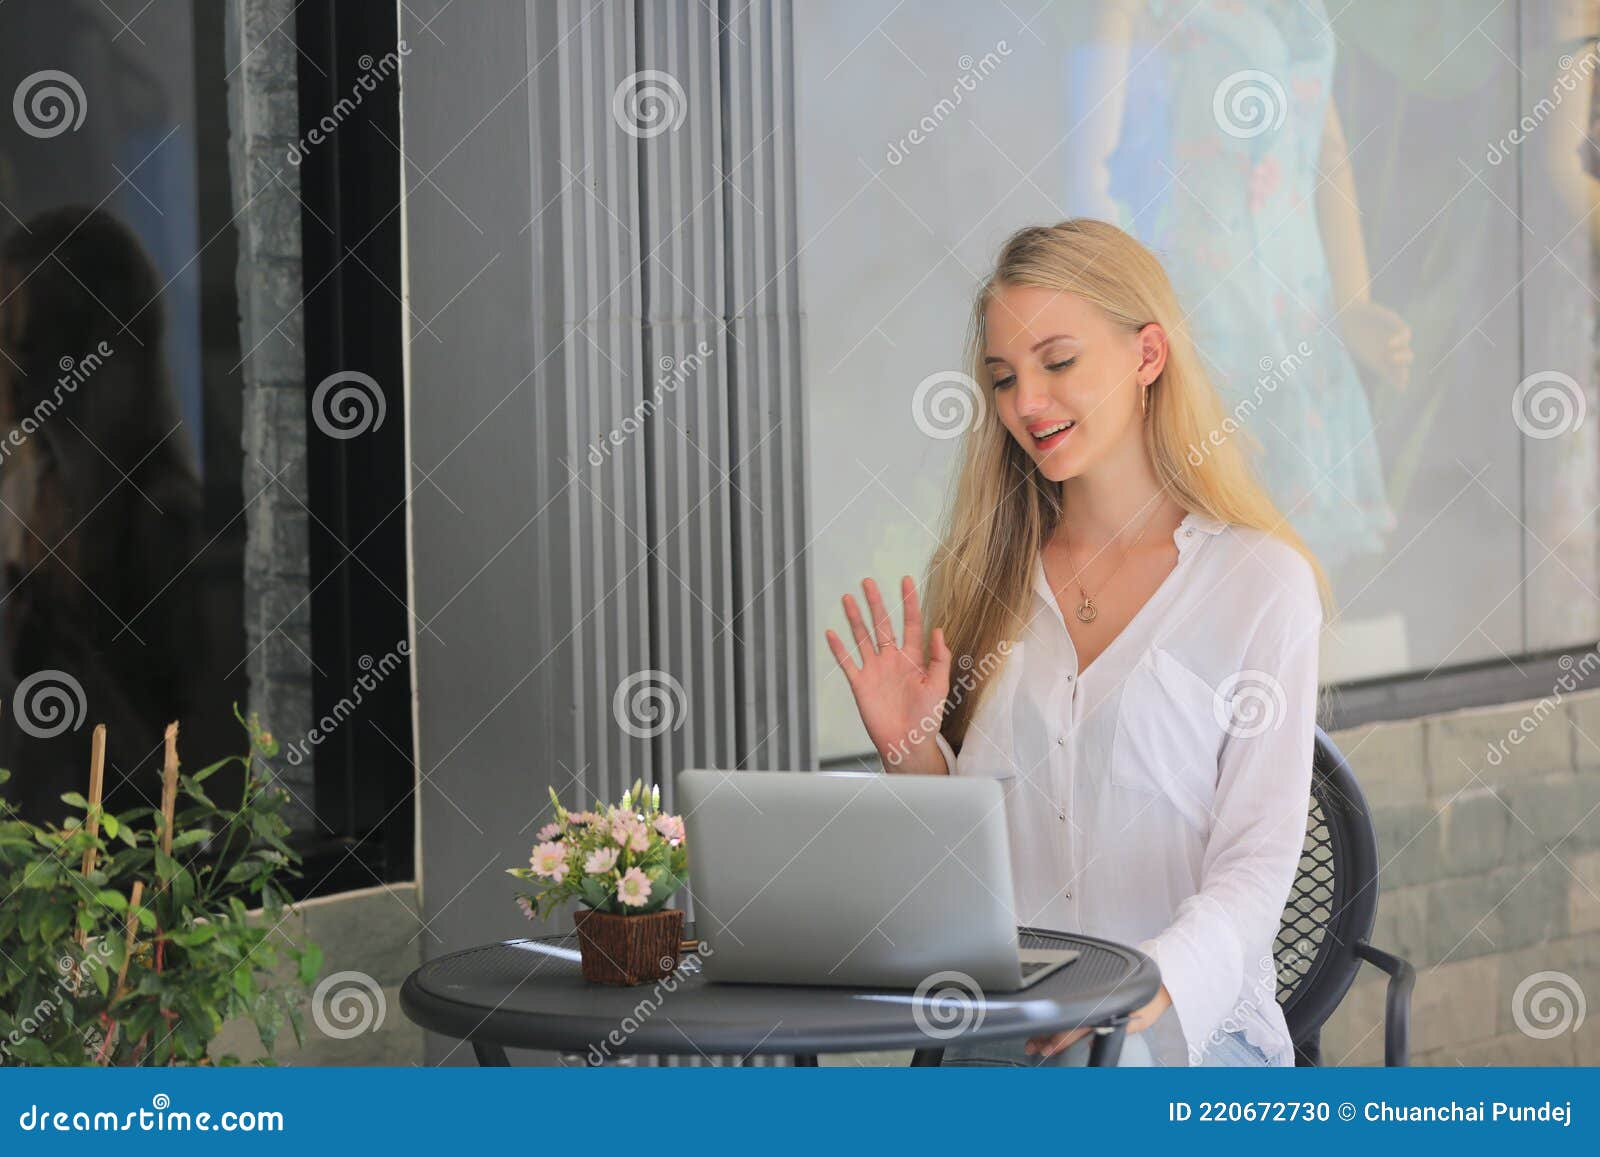 beautiful blonde hair girl sitting with laptop in front of retails shop,small business owner concept.